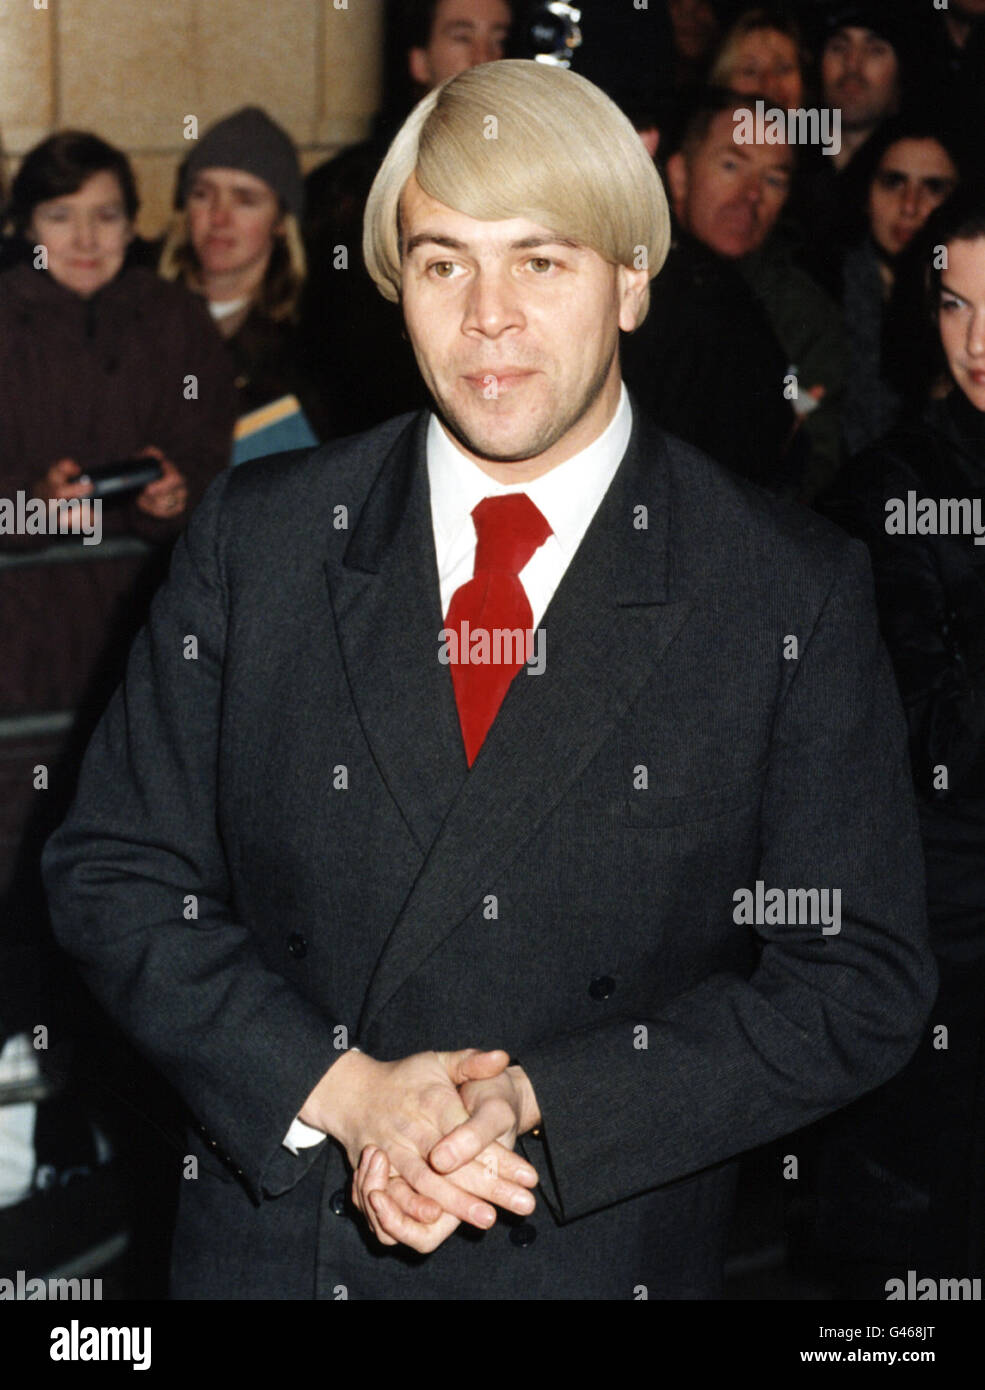 LONDON : 9/1/97 : EASY LISTENING POP SINGER, MIKE FLOWERS, ARRIVES FOR THE PREMIERE OF 'THAT THING YOU DO' AT LEICESTER SQUARE. PA NEWS PHOTO. Stock Photo